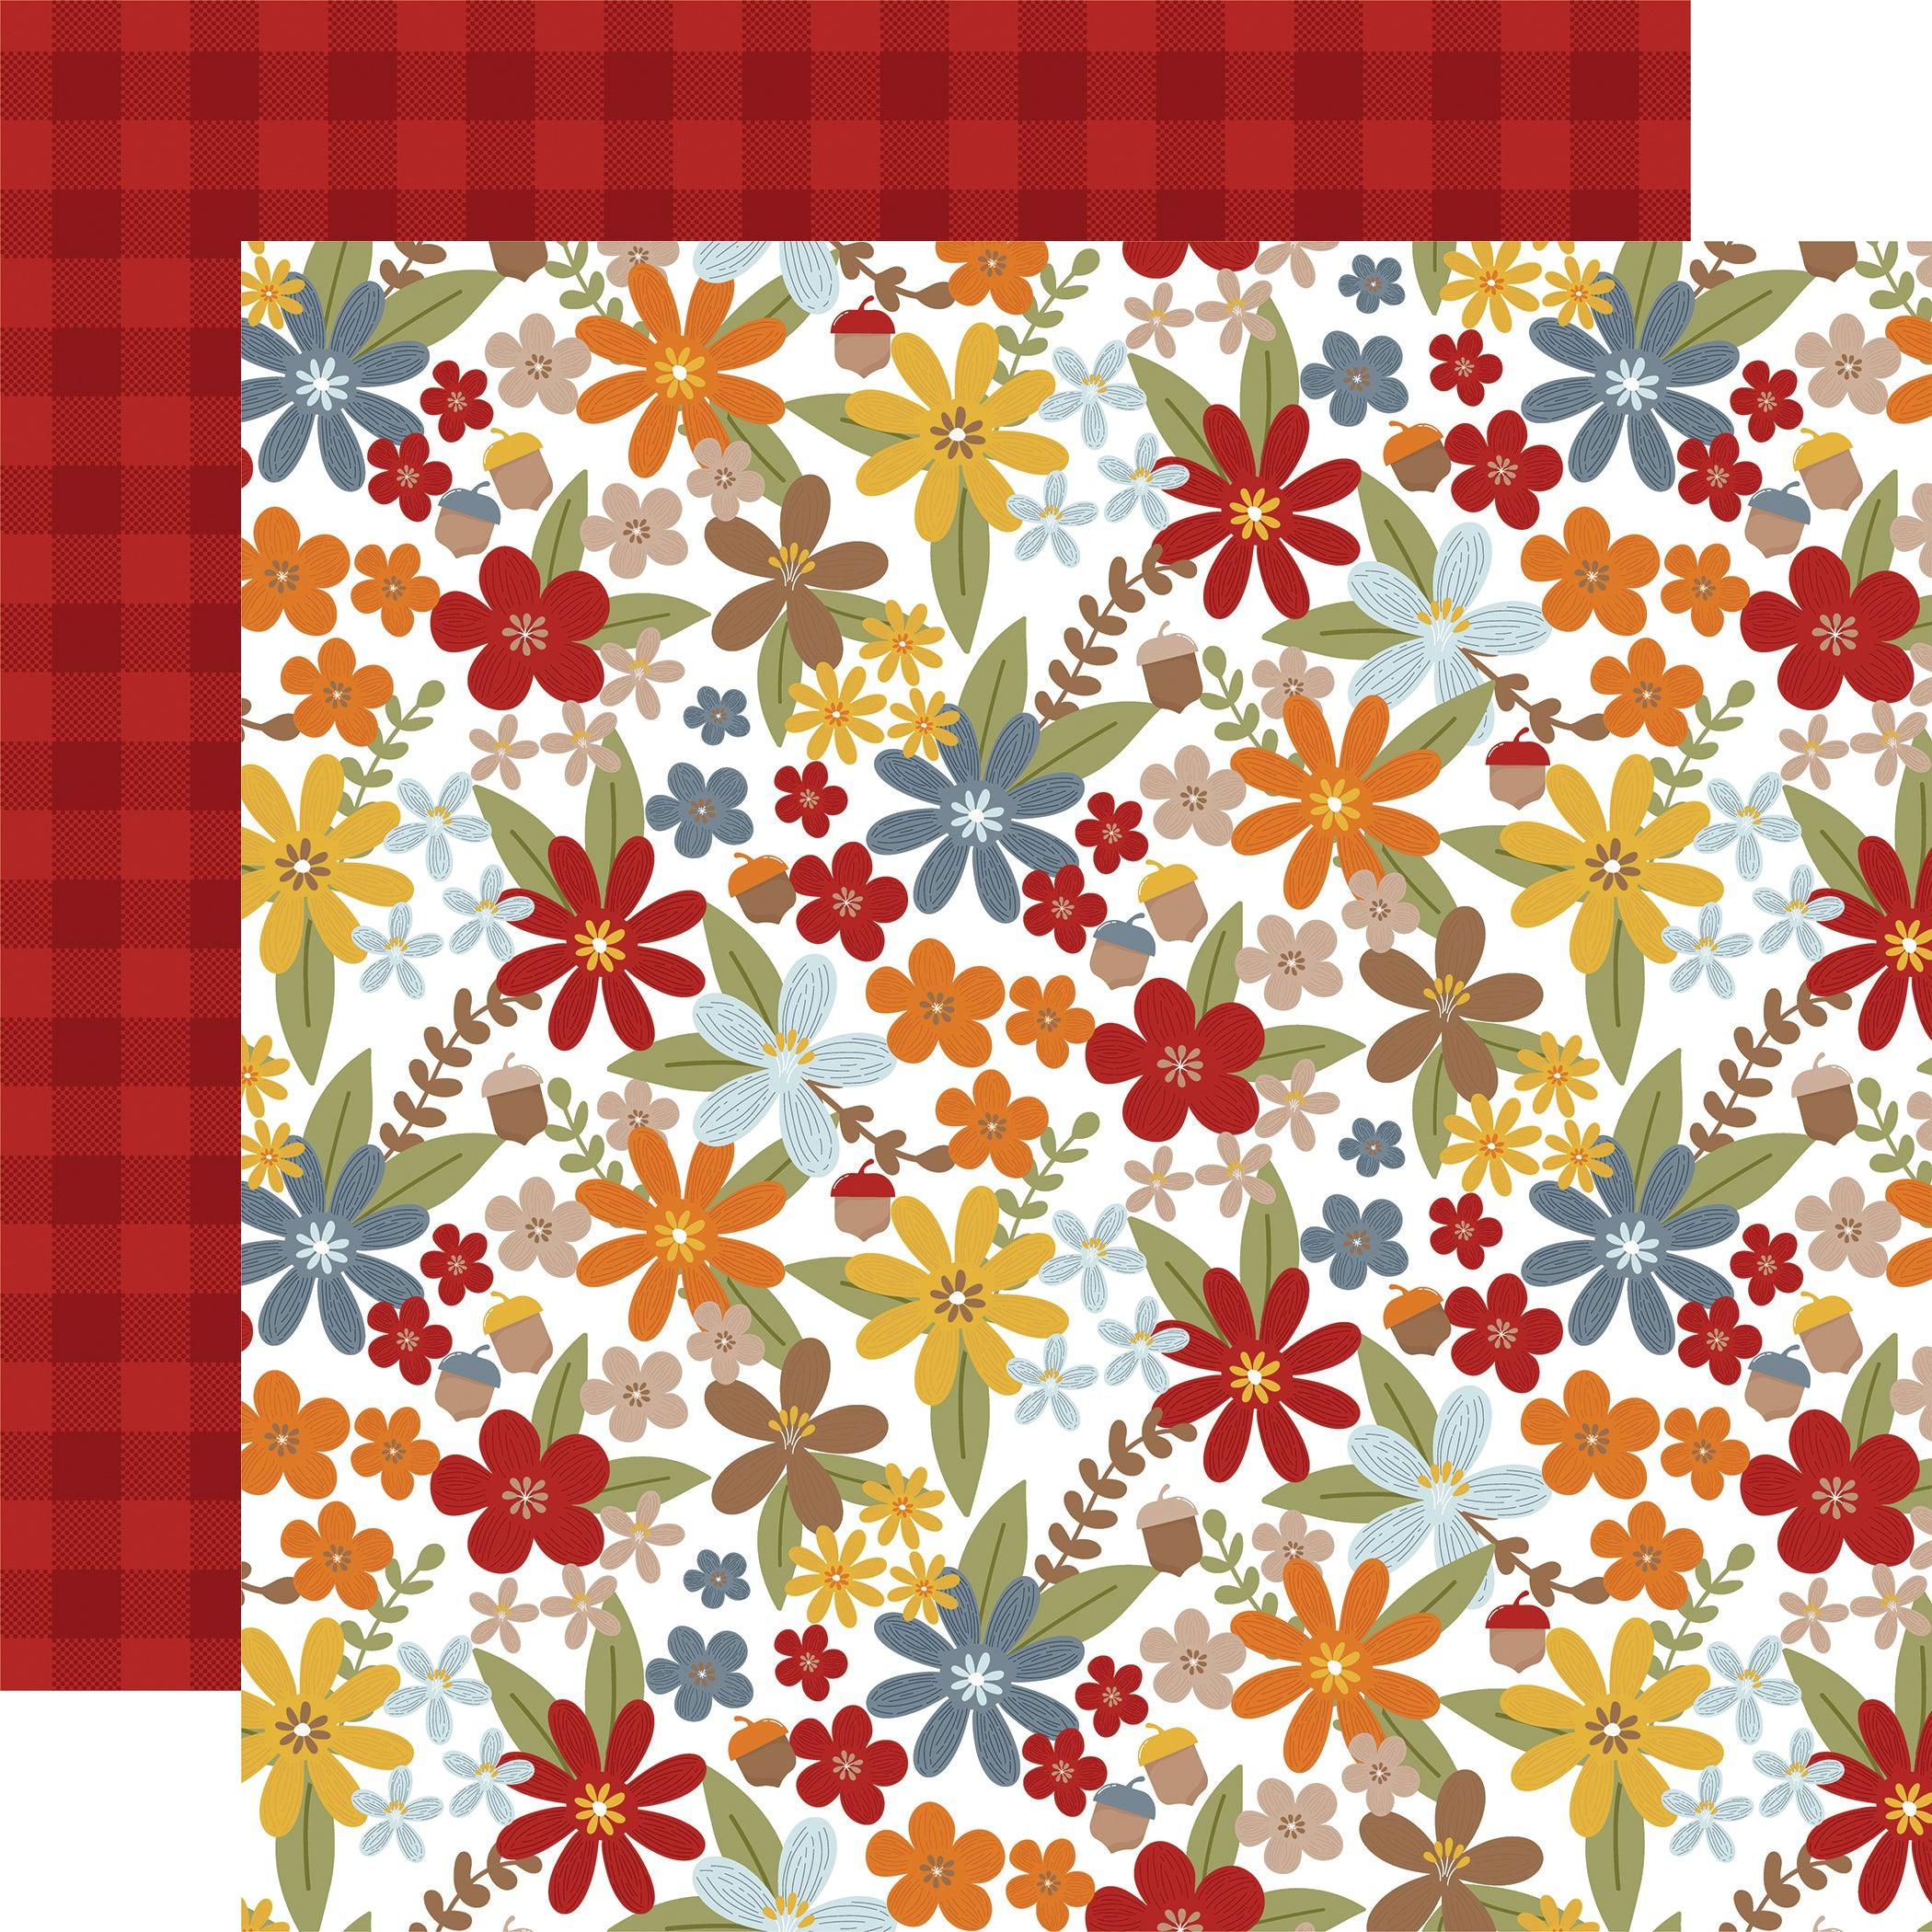 Fall Fever Collection Fall Fever Floral 12 x 12 Double-Sided Scrapbook Paper by Echo Park Paper - Scrapbook Supply Companies